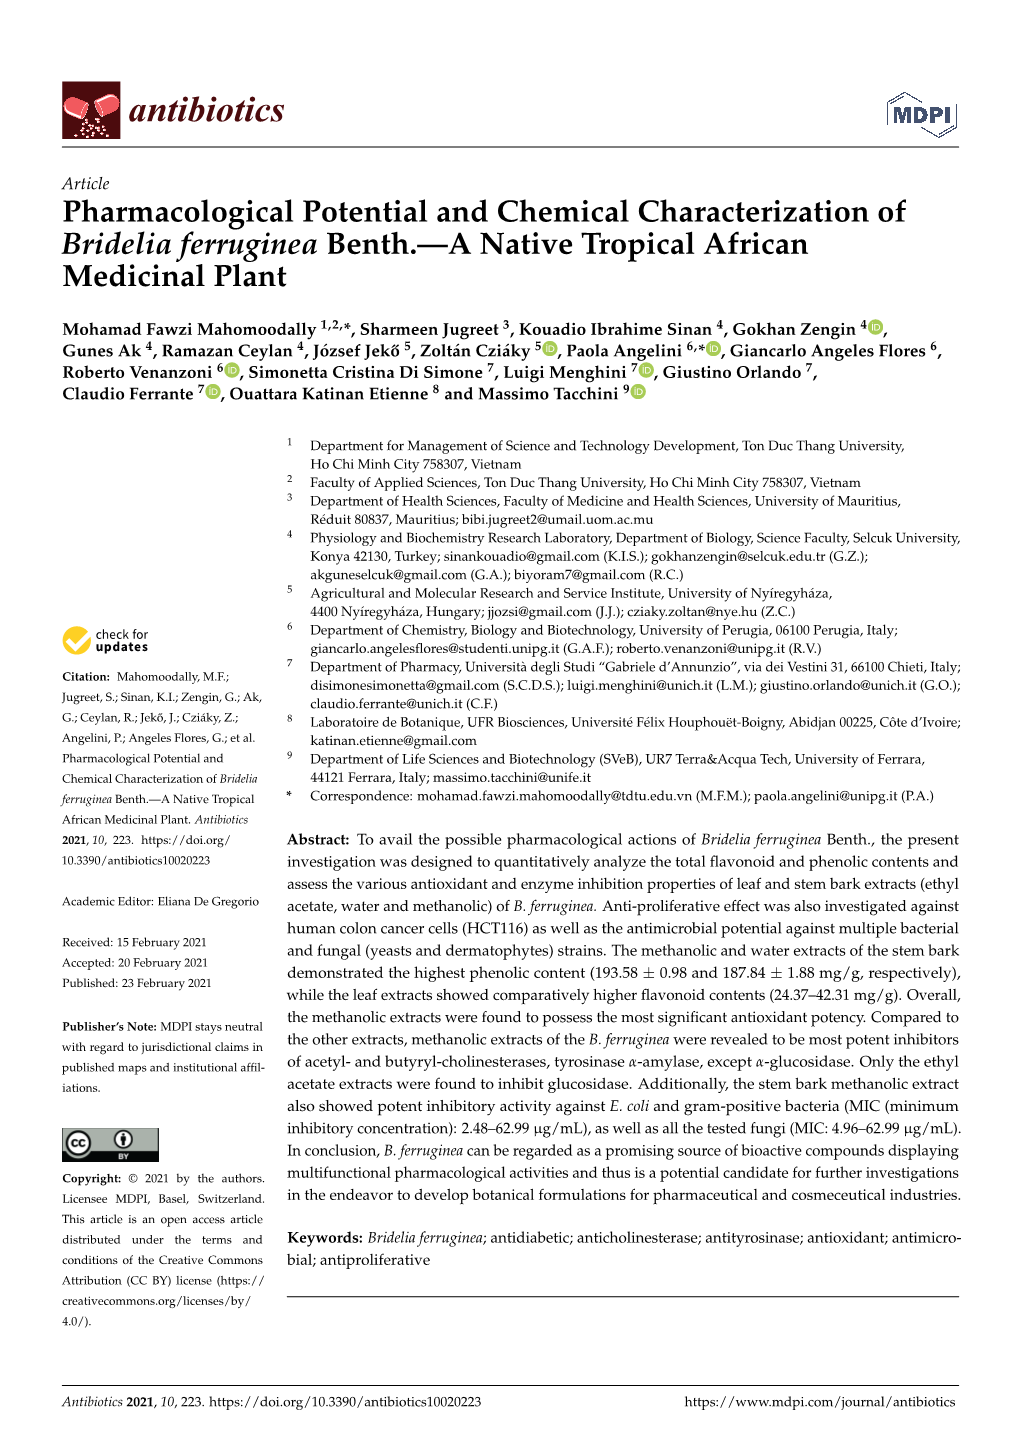 Pharmacological Potential and Chemical Characterization of Bridelia Ferruginea Benth.—A Native Tropical African Medicinal Plant